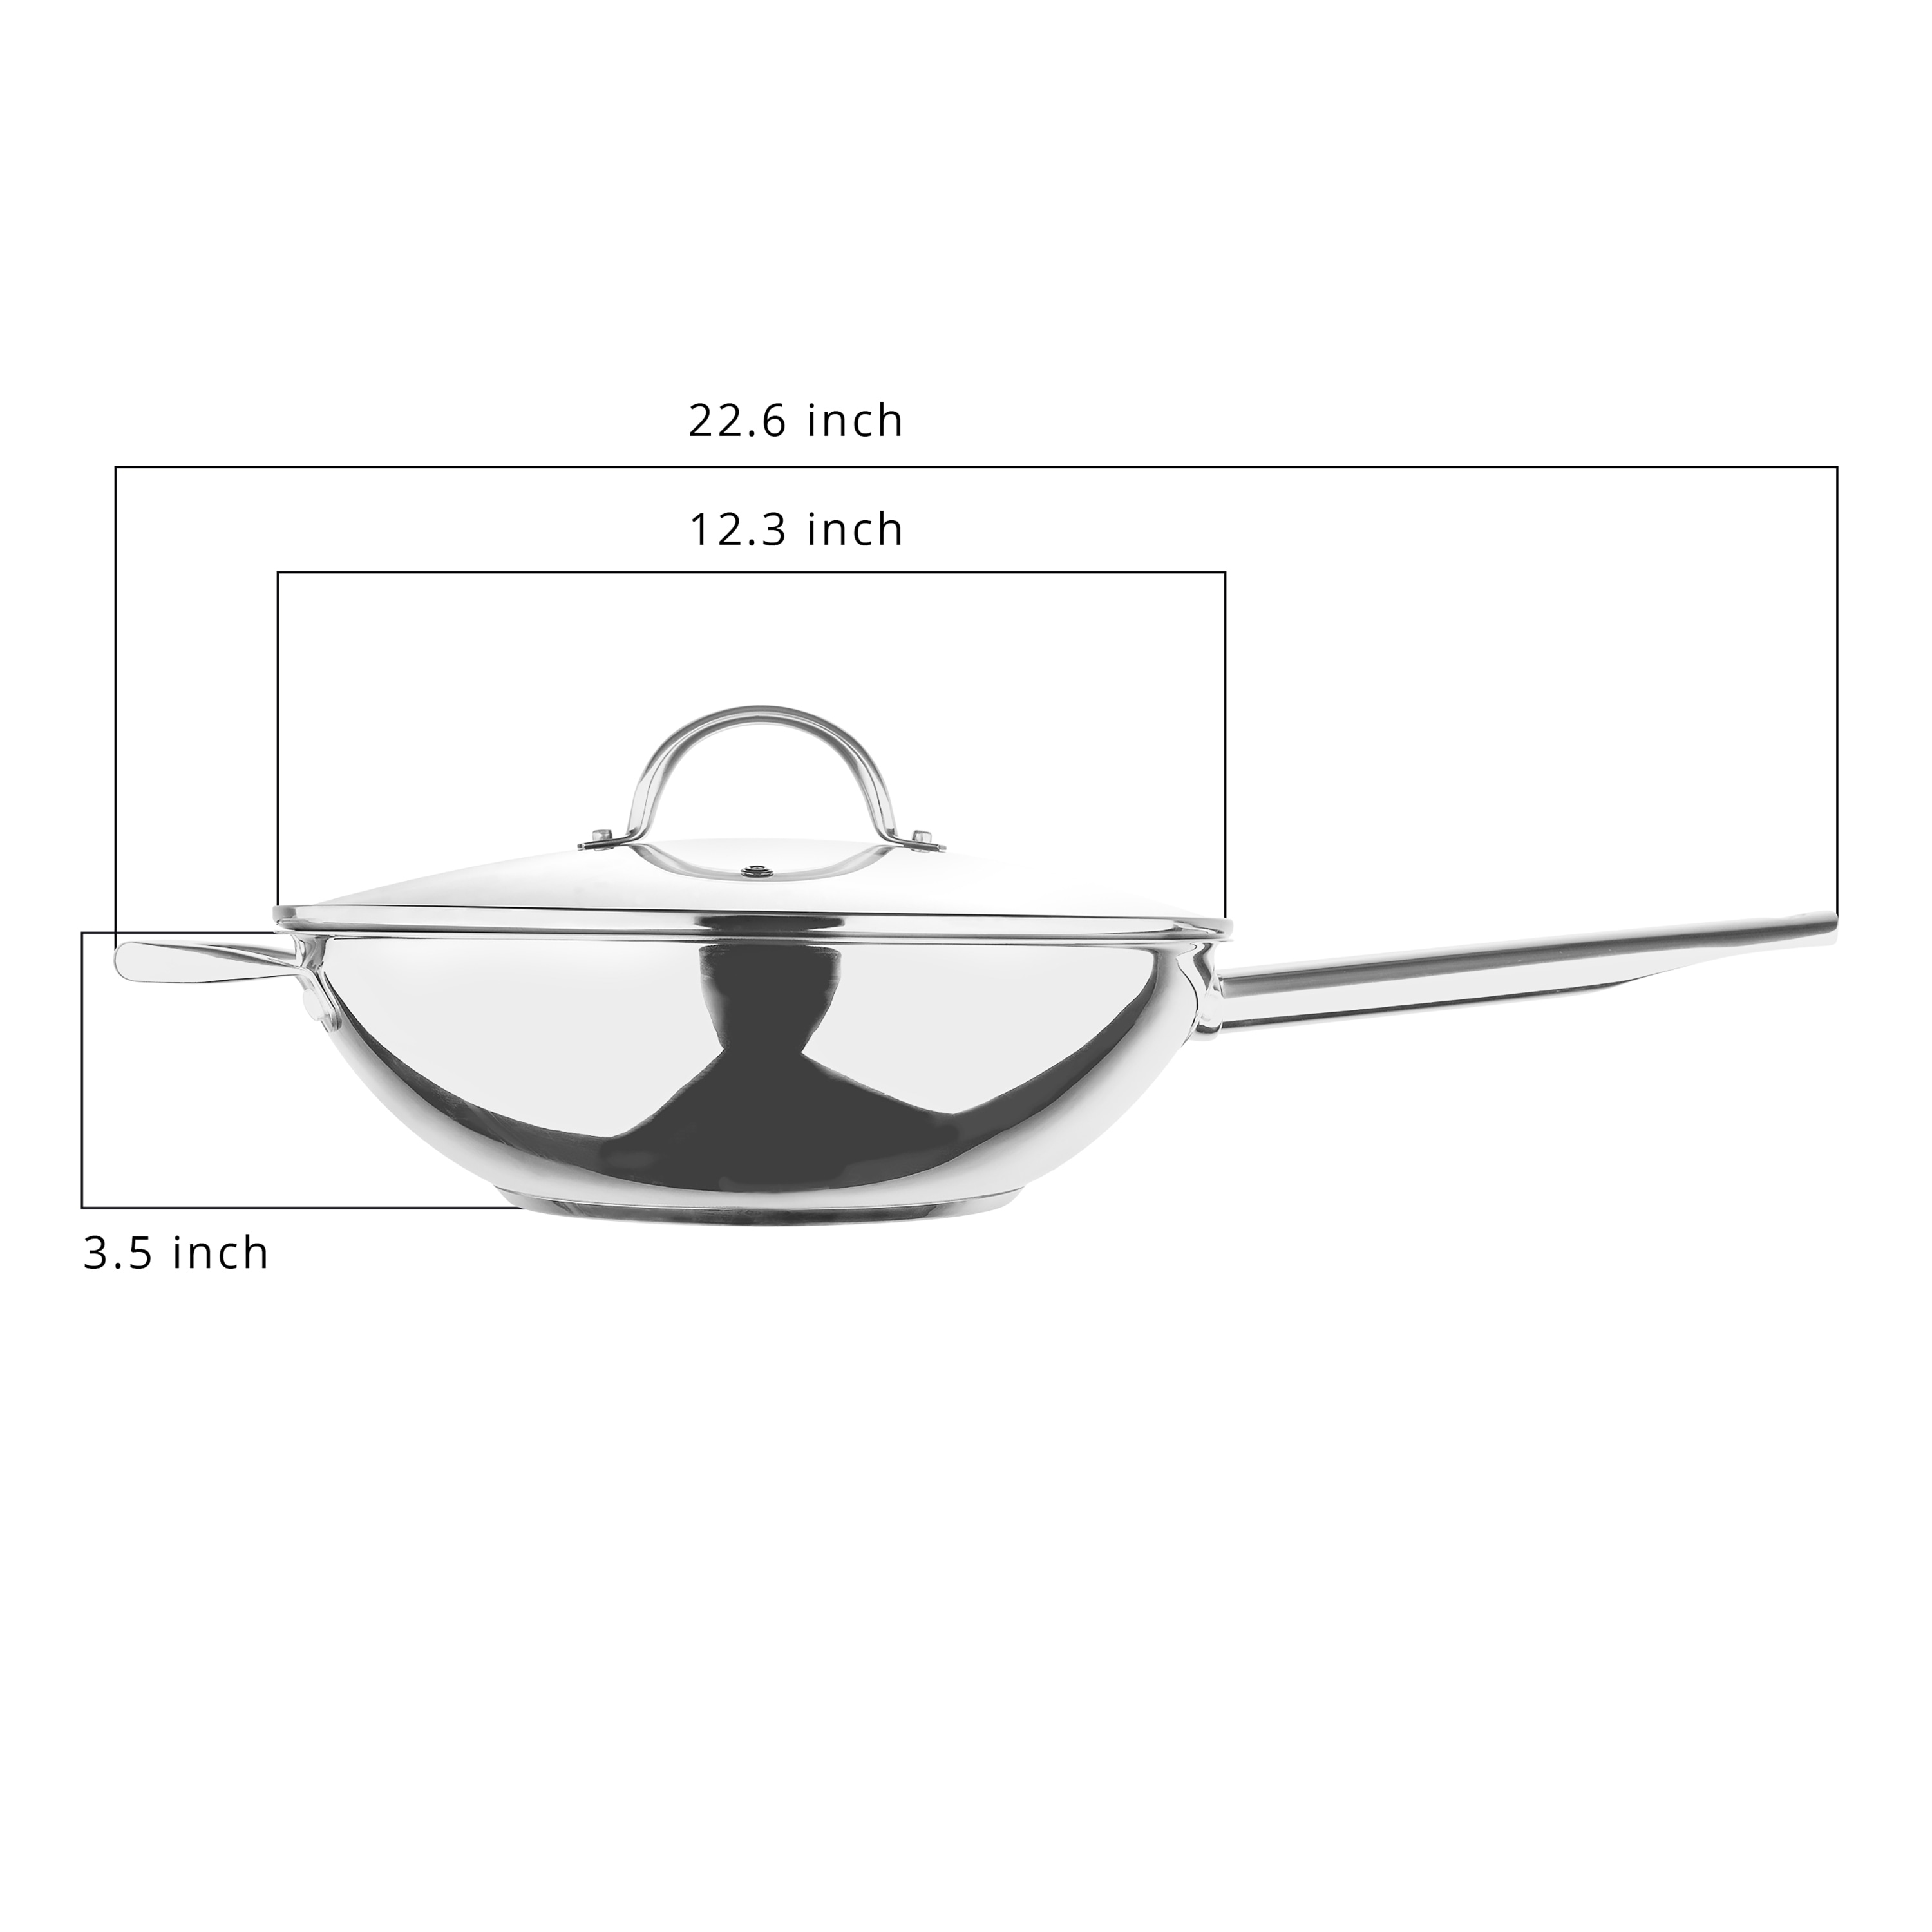 https://ak1.ostkcdn.com/images/products/is/images/direct/0b1029b70cf2ca9092798de4c8cdf9313a24fc28/Bergner-BGUS10111STS-12-Inch-Stir-Fry-Pan-Stainless-Steel-Dishwasher-Safe-Induction-Ready-with-Lid.jpg